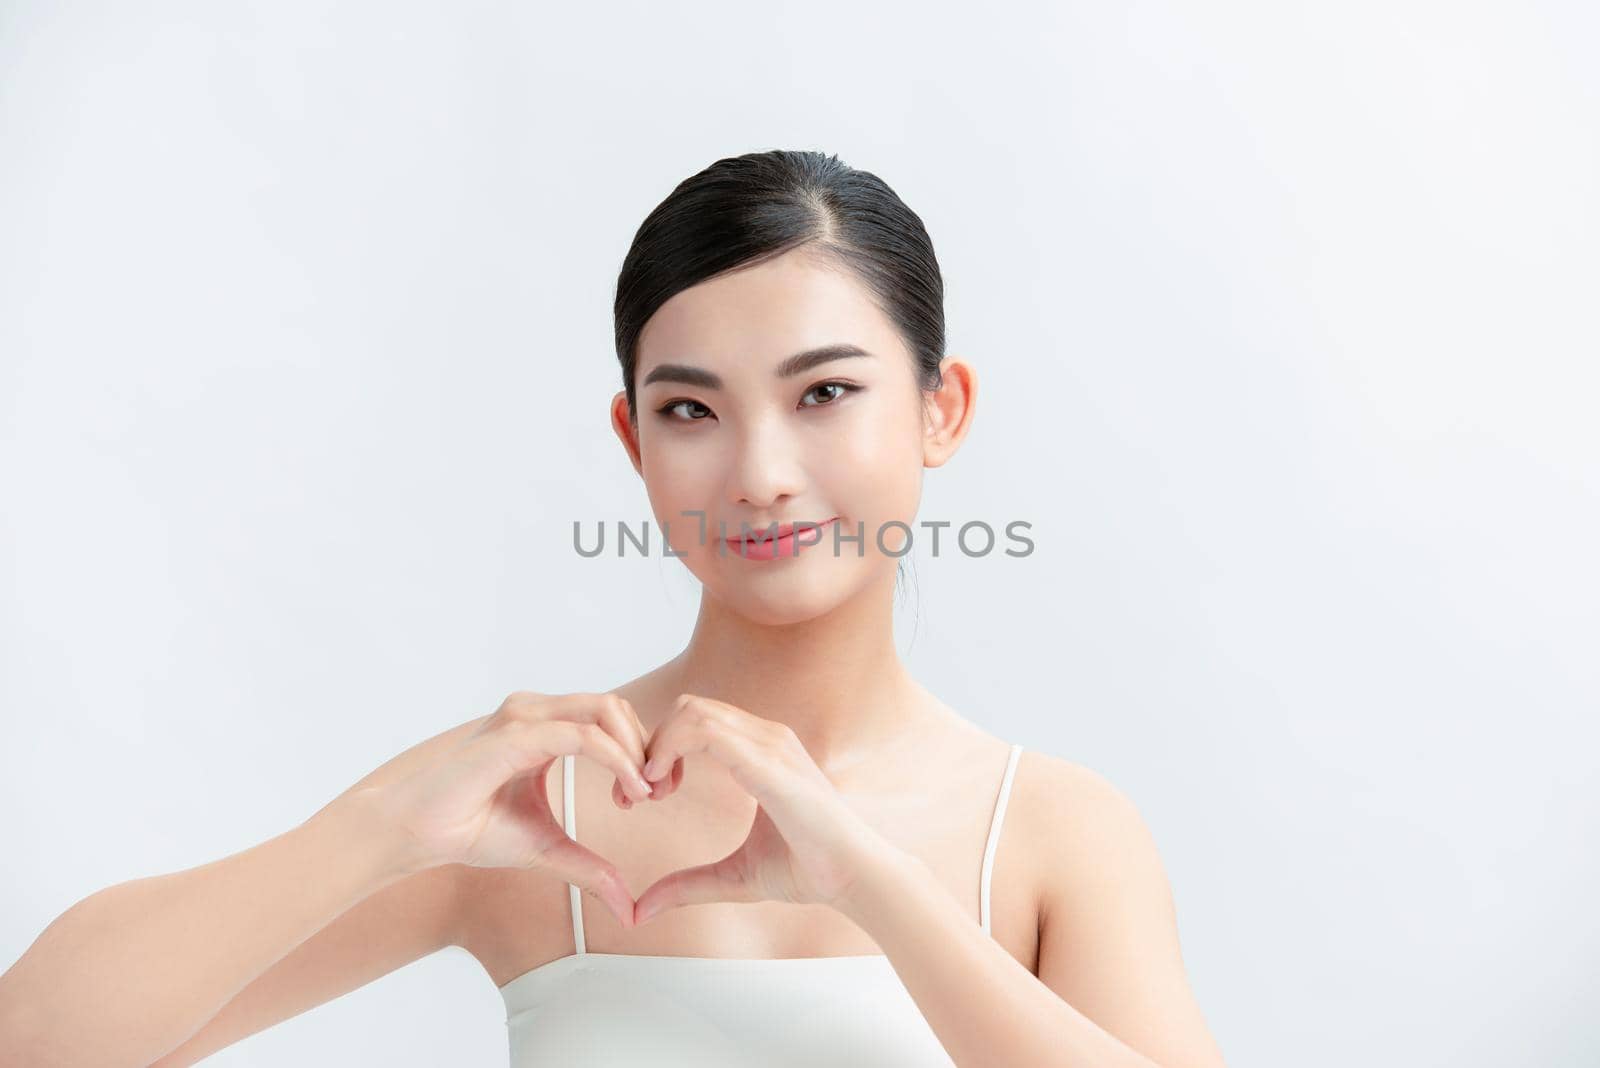 Cute Girl on a white background made a heart out of her hands near her chest